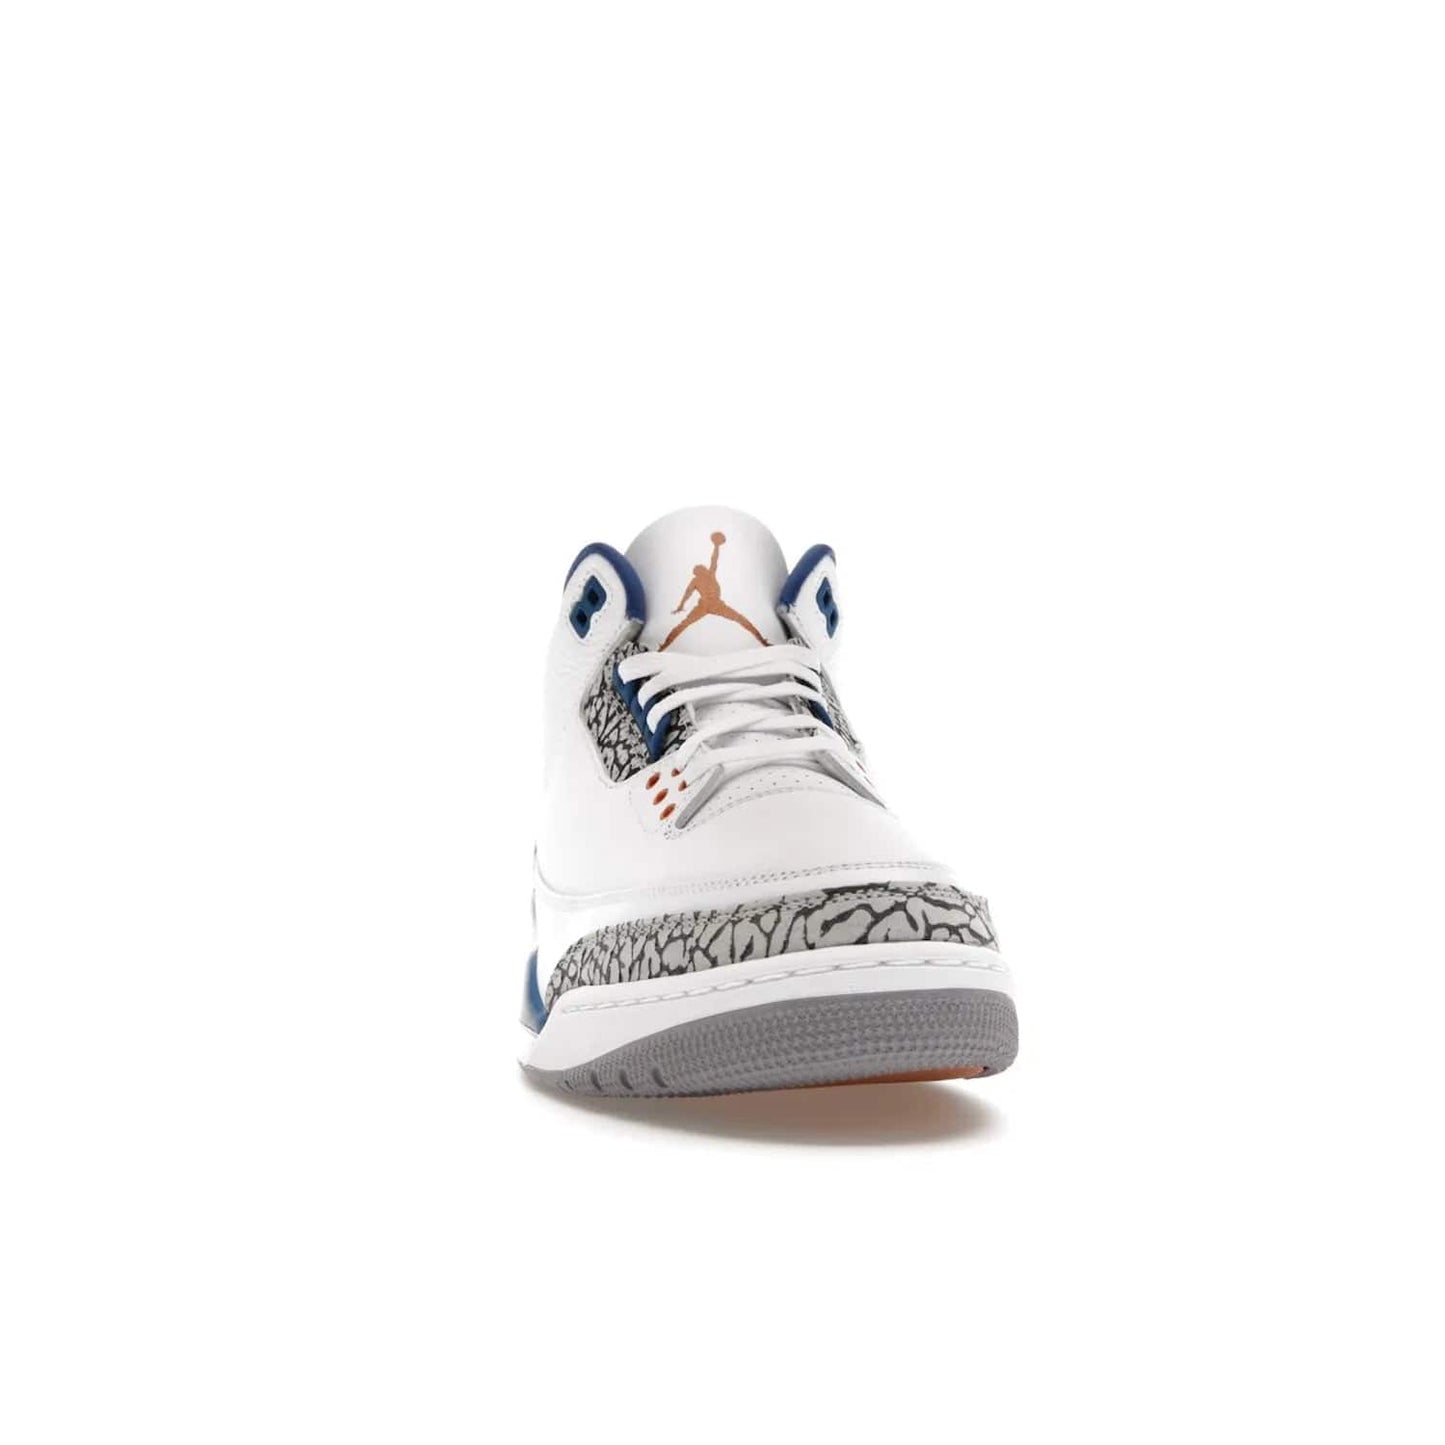 Jordan 3 Retro Wizards - Image 9 - Only at www.BallersClubKickz.com - ##
Special tribute sneaker from Jordan Brand to Michael Jordan's time with the Washington Wizards. Iconic white upper, orange Jumpman logo, blue accents, metallic copper details, and cement grey outsole. Buy the Air Jordan 3 Retro Wizards April 29, 2023.